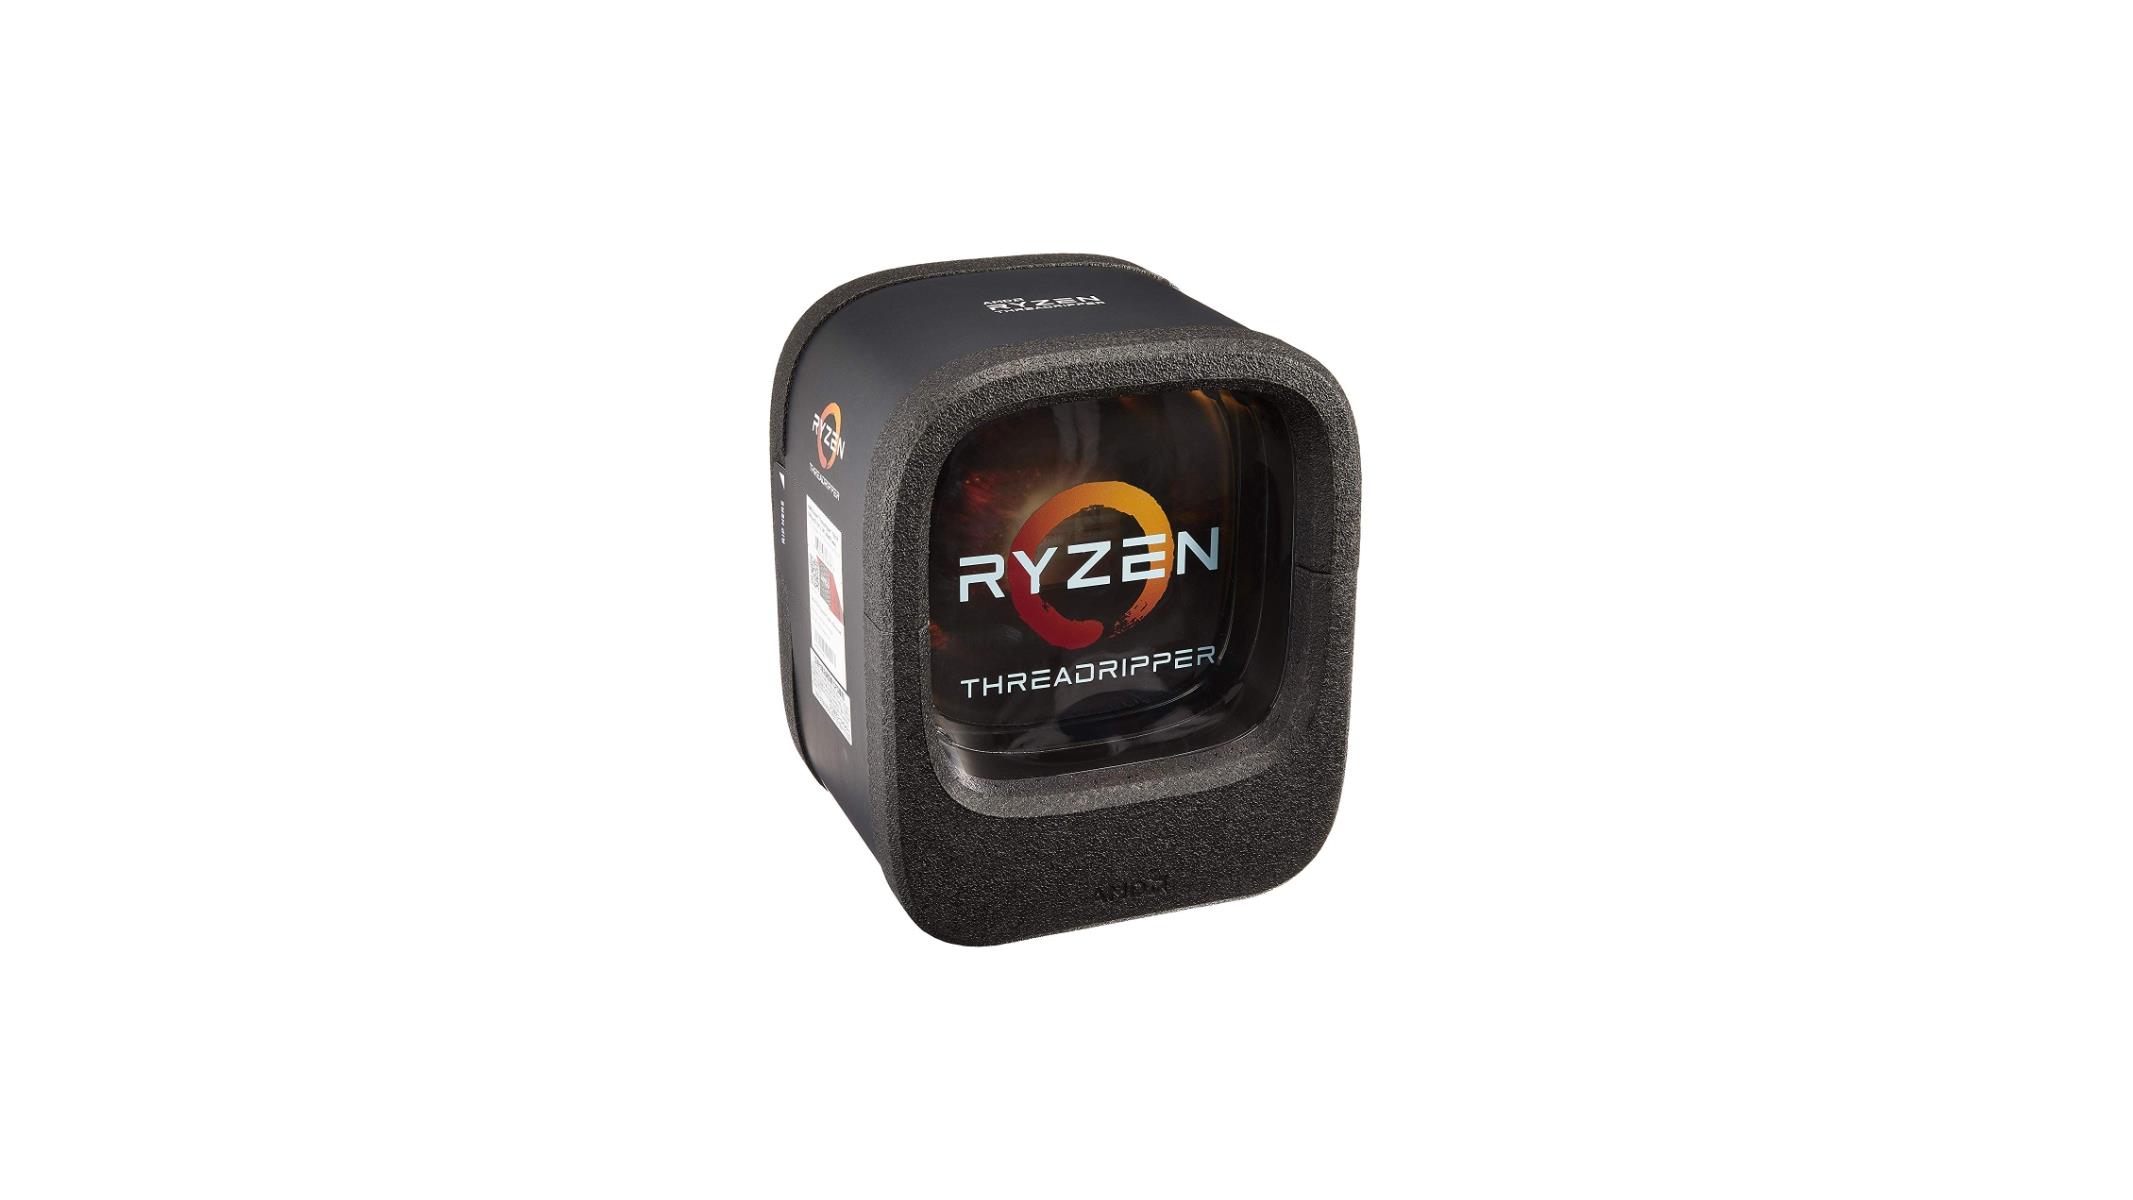 AMD Threadripper 1920X 12-Core CPU Is Half Price Just $199 In This